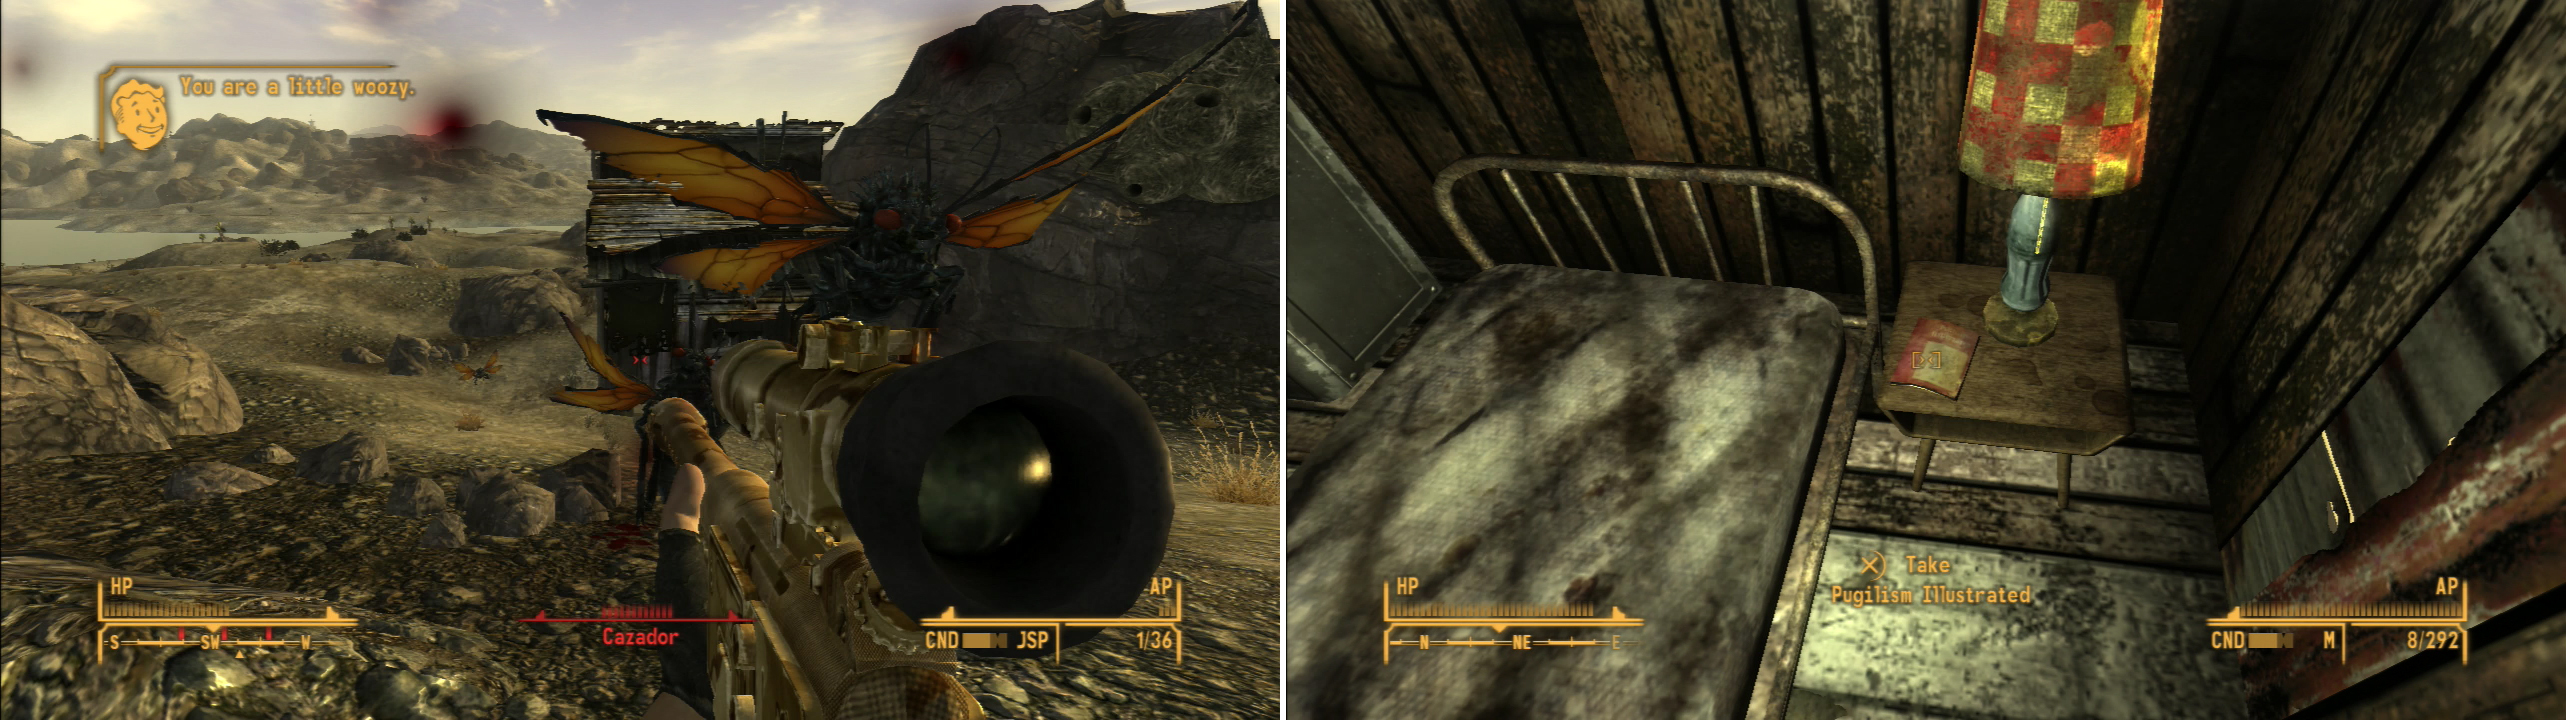 Be careful leaving the Cap Counterfeiting Shack, as Cazadores might show up to ruin your day (left). In the Fisherman’s Pride shack you’ll find a copy of Pugilism Illustrated (right).